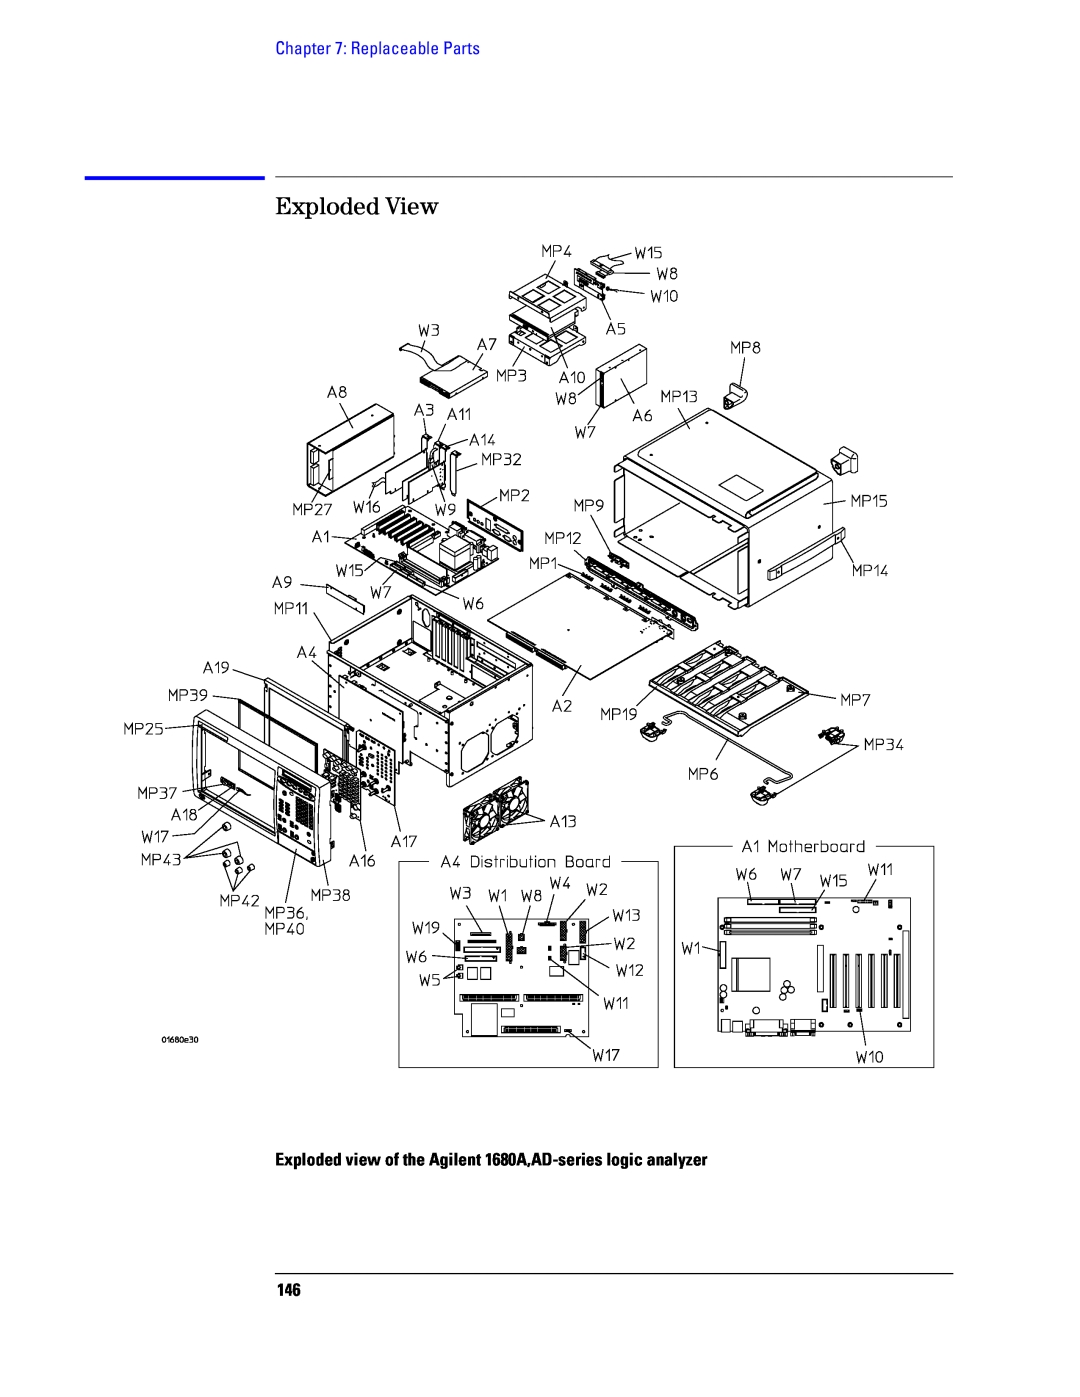 Agilent Technologies Exploded View, Replaceable Parts, Exploded view of the Agilent 1680A,AD-series logic analyzer 